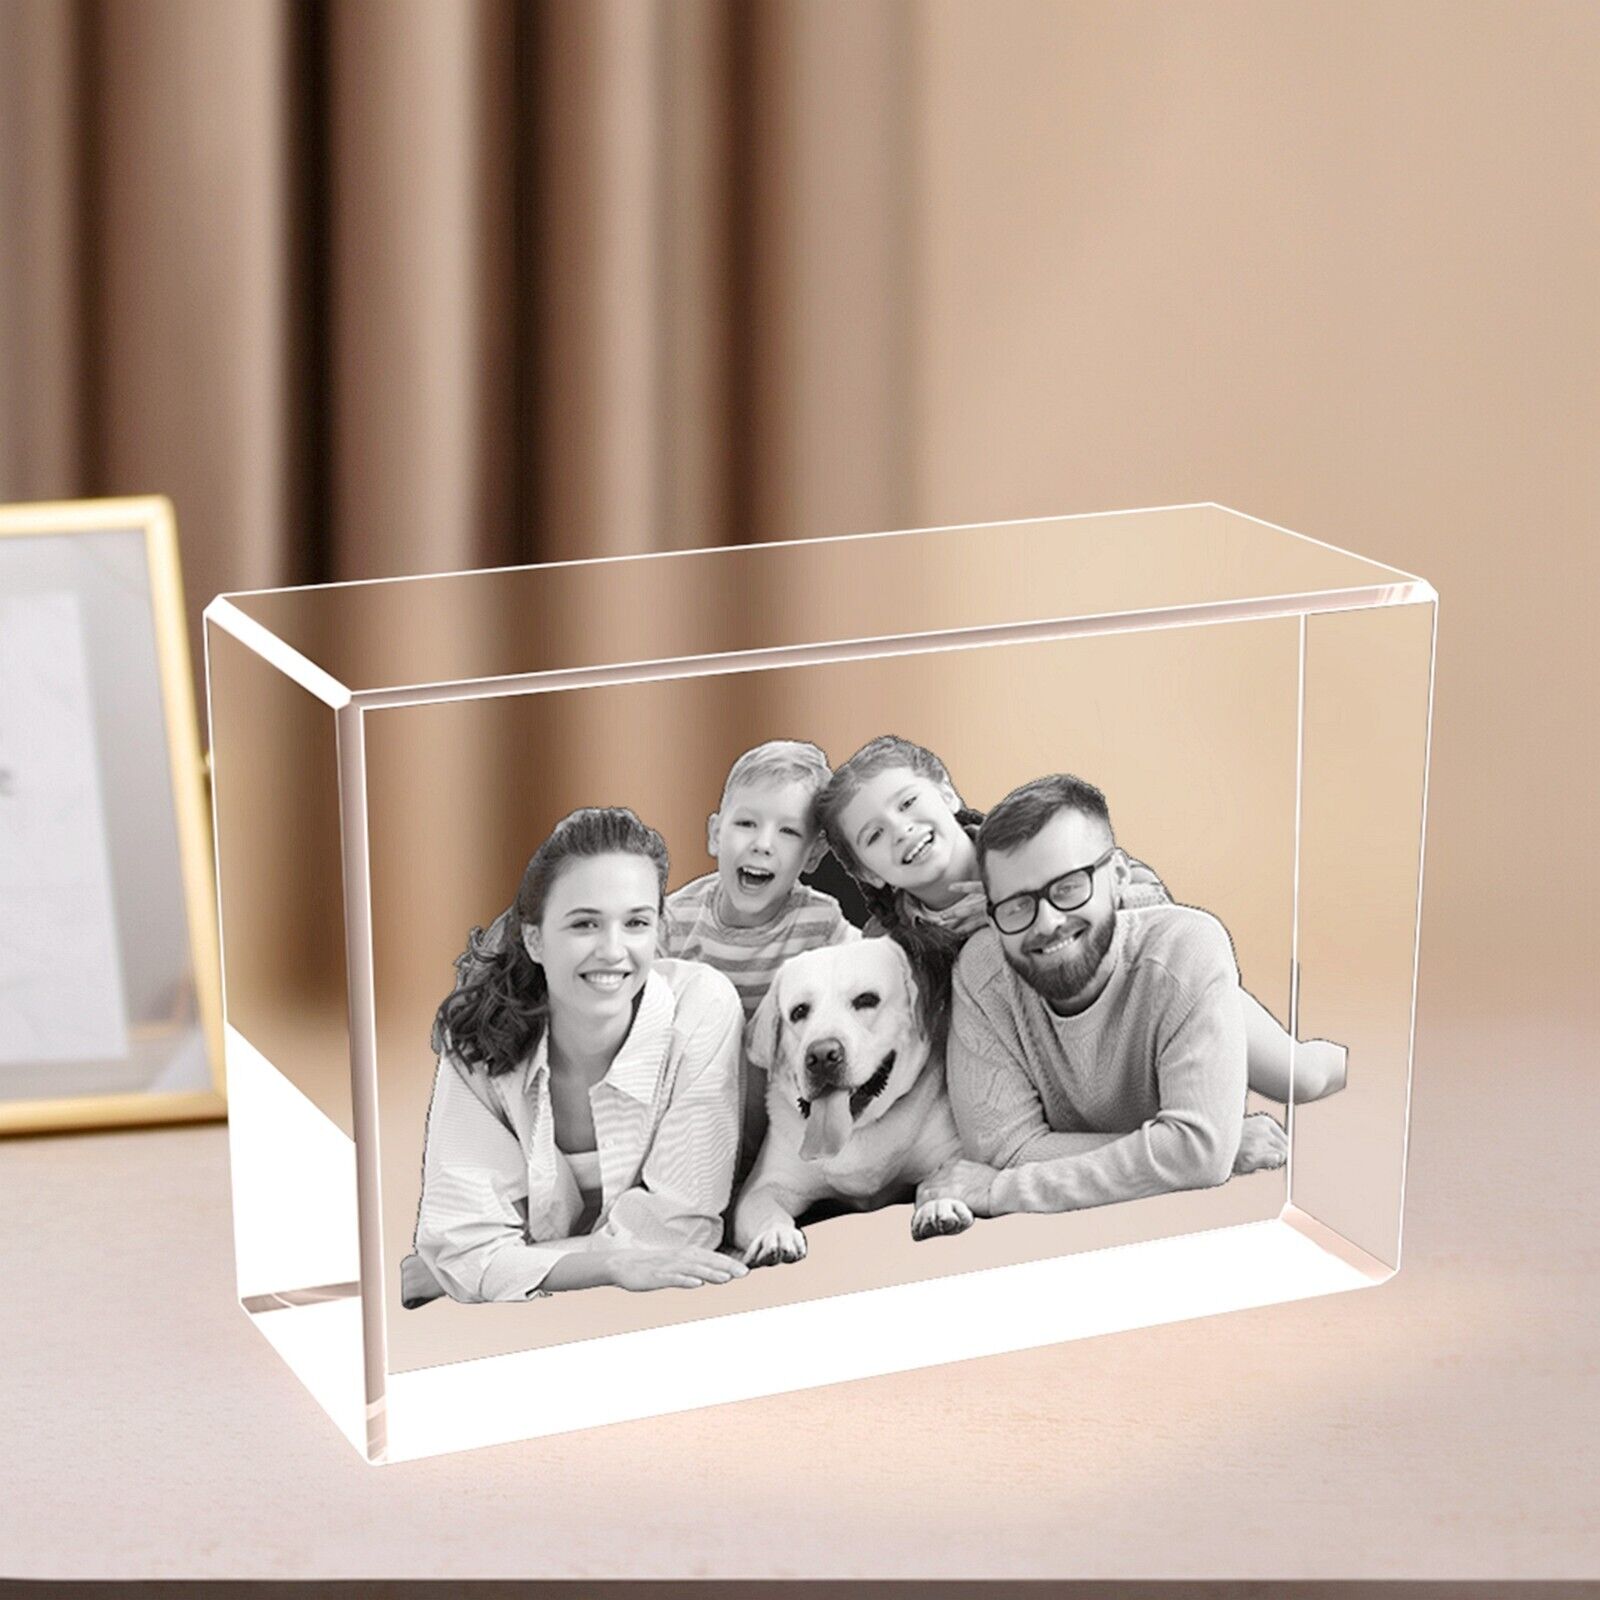 Personalised 3D Crystal Photo Gift for Birthday, Anniversary, Fathers day, Xmas